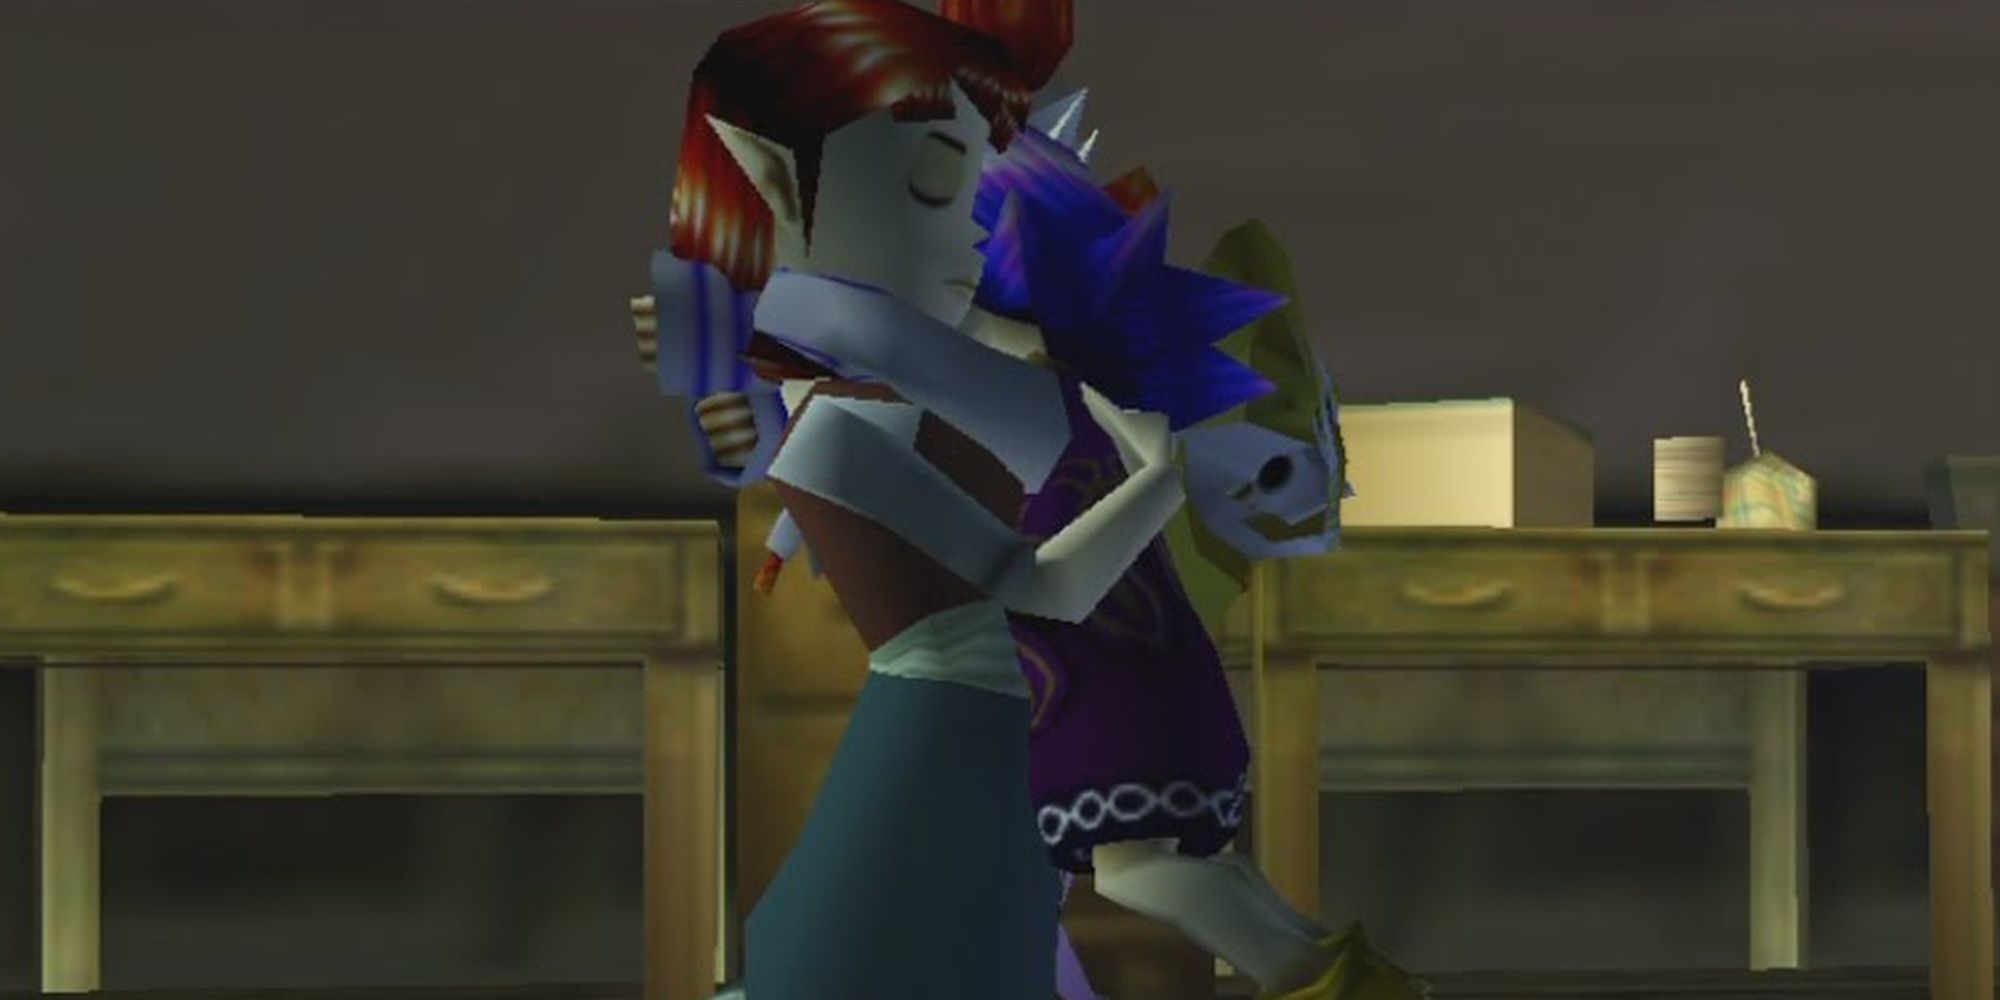 The end of the Kafei and Anju questline from Majora's Mask. The two characters embrace in the inn.